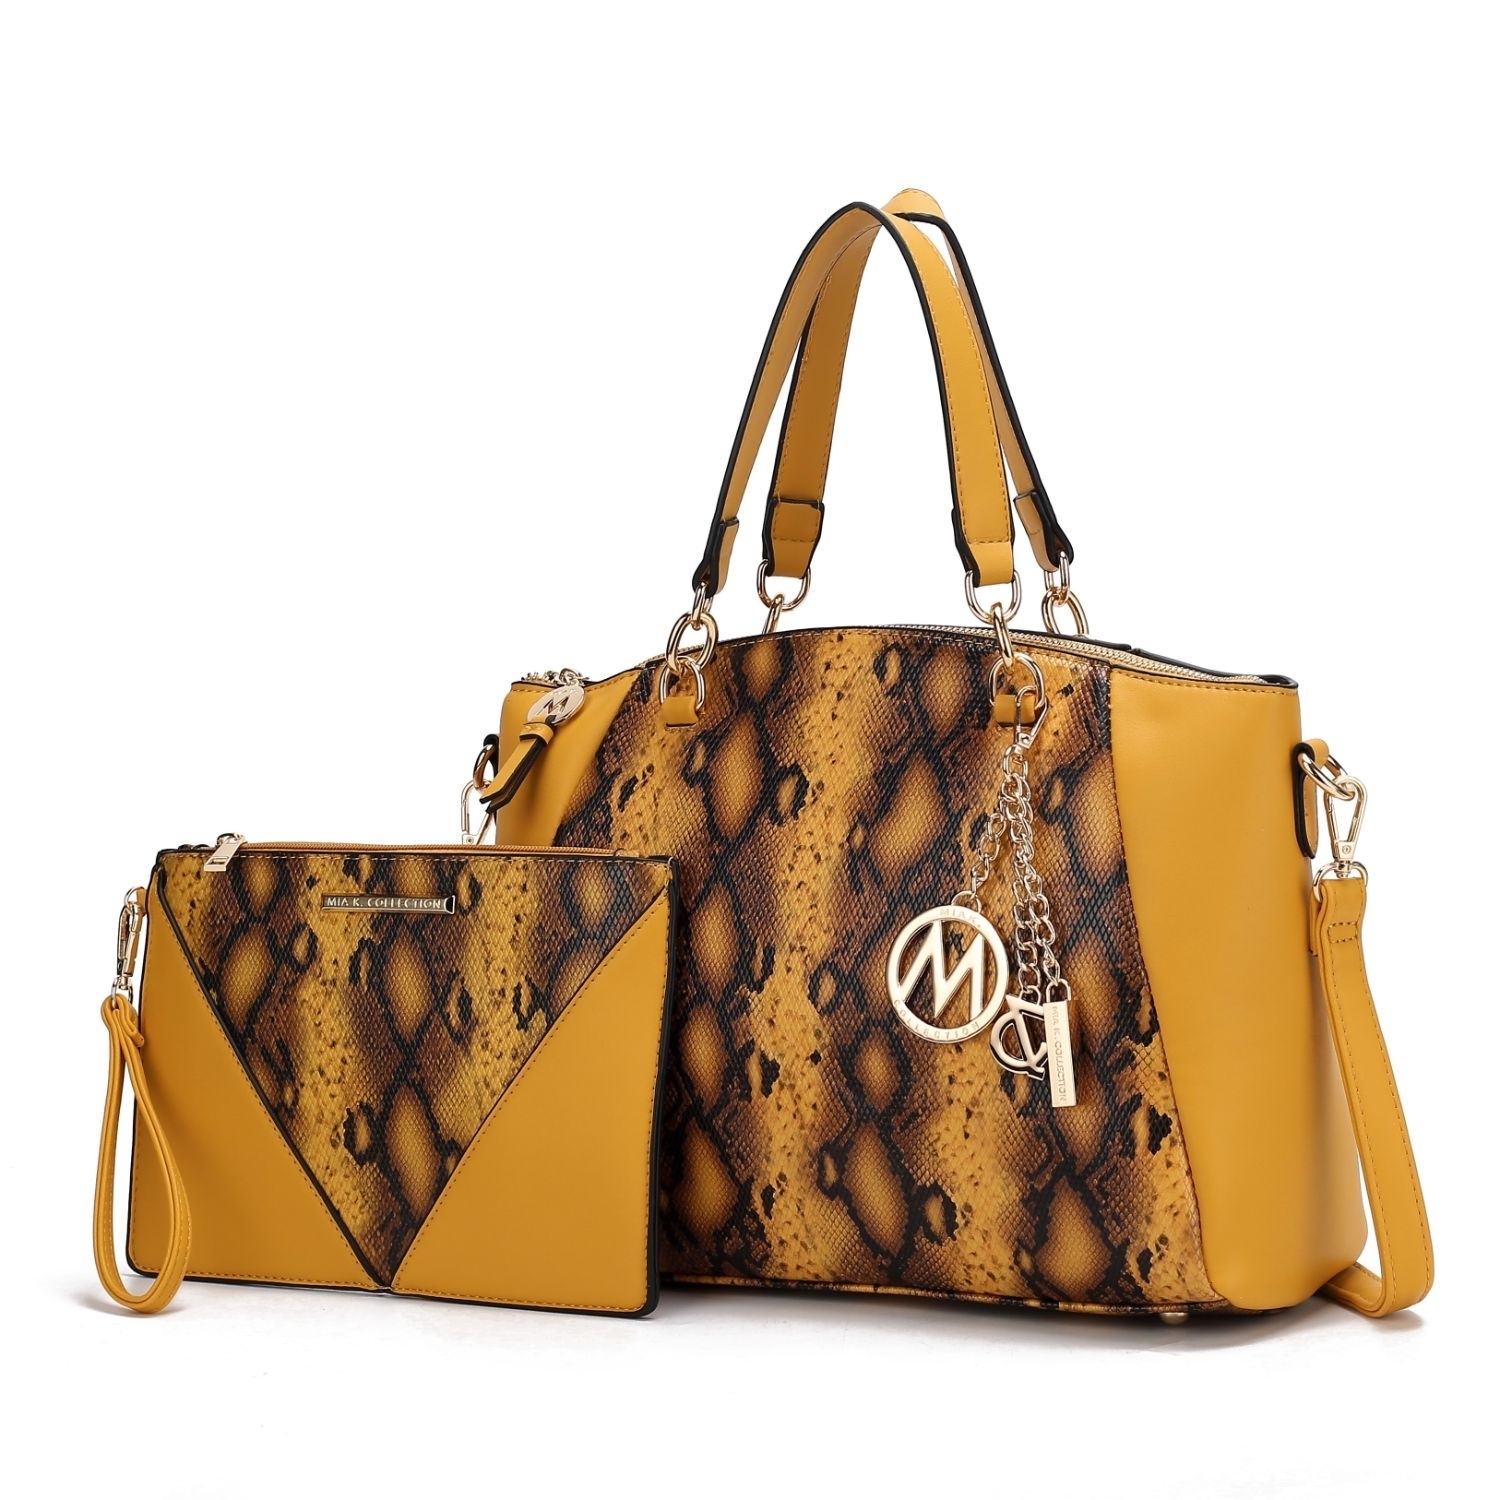 MKF Collection Addison Snake Embossed Vegan Leather Women's Tote Bag With Matching Wristlet By Mia K- 2 Pieces - Mustard